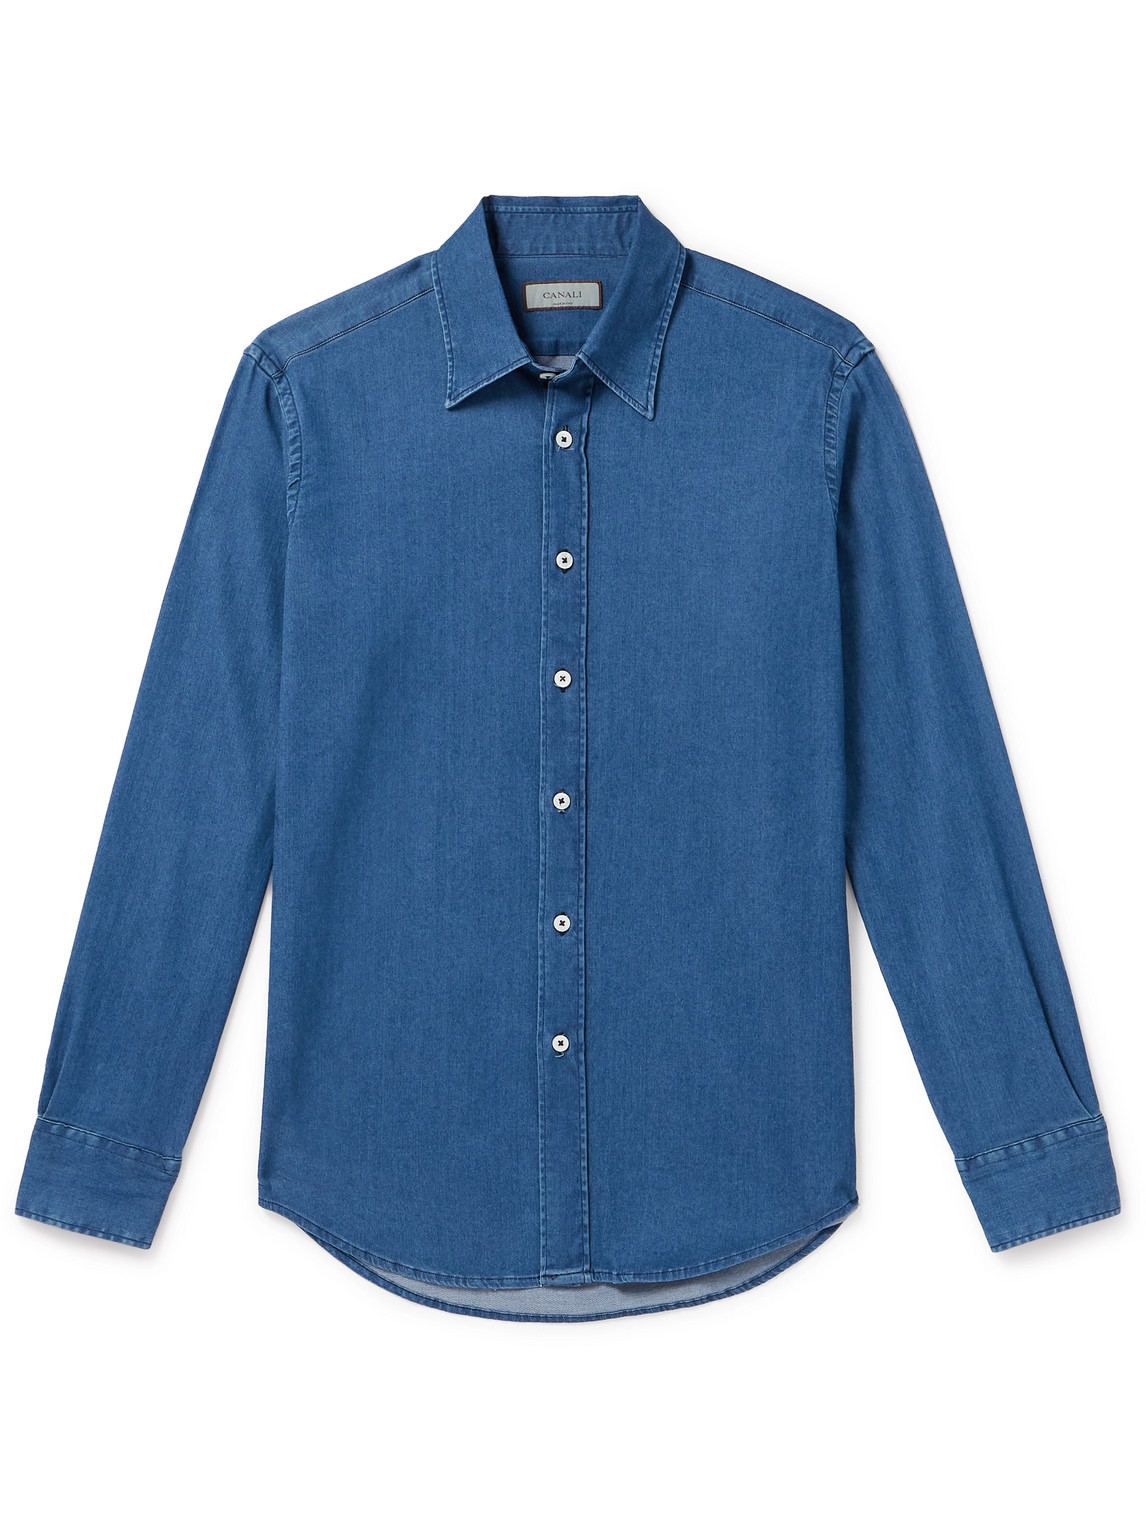 Canali Men's Cotton Chambray Sport Shirt In Blue